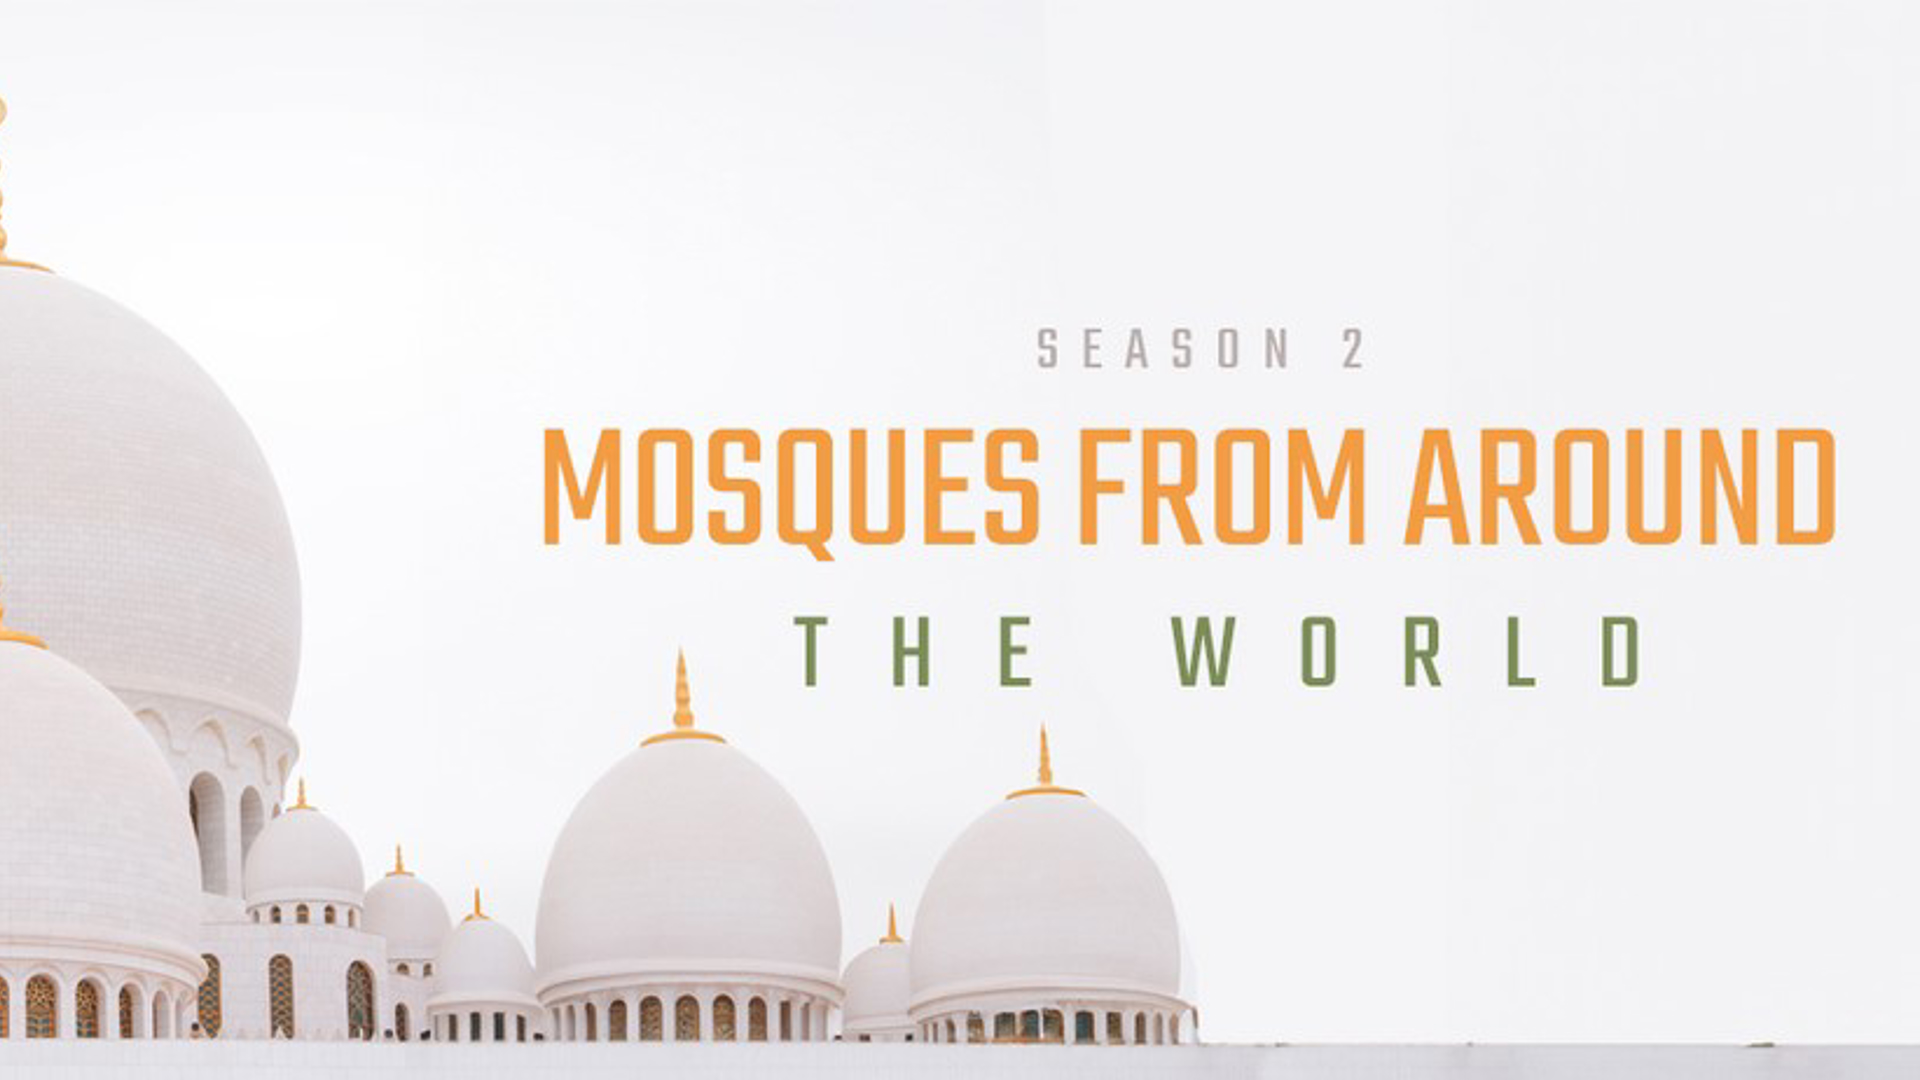 Mosques from Around the World (Season 2)